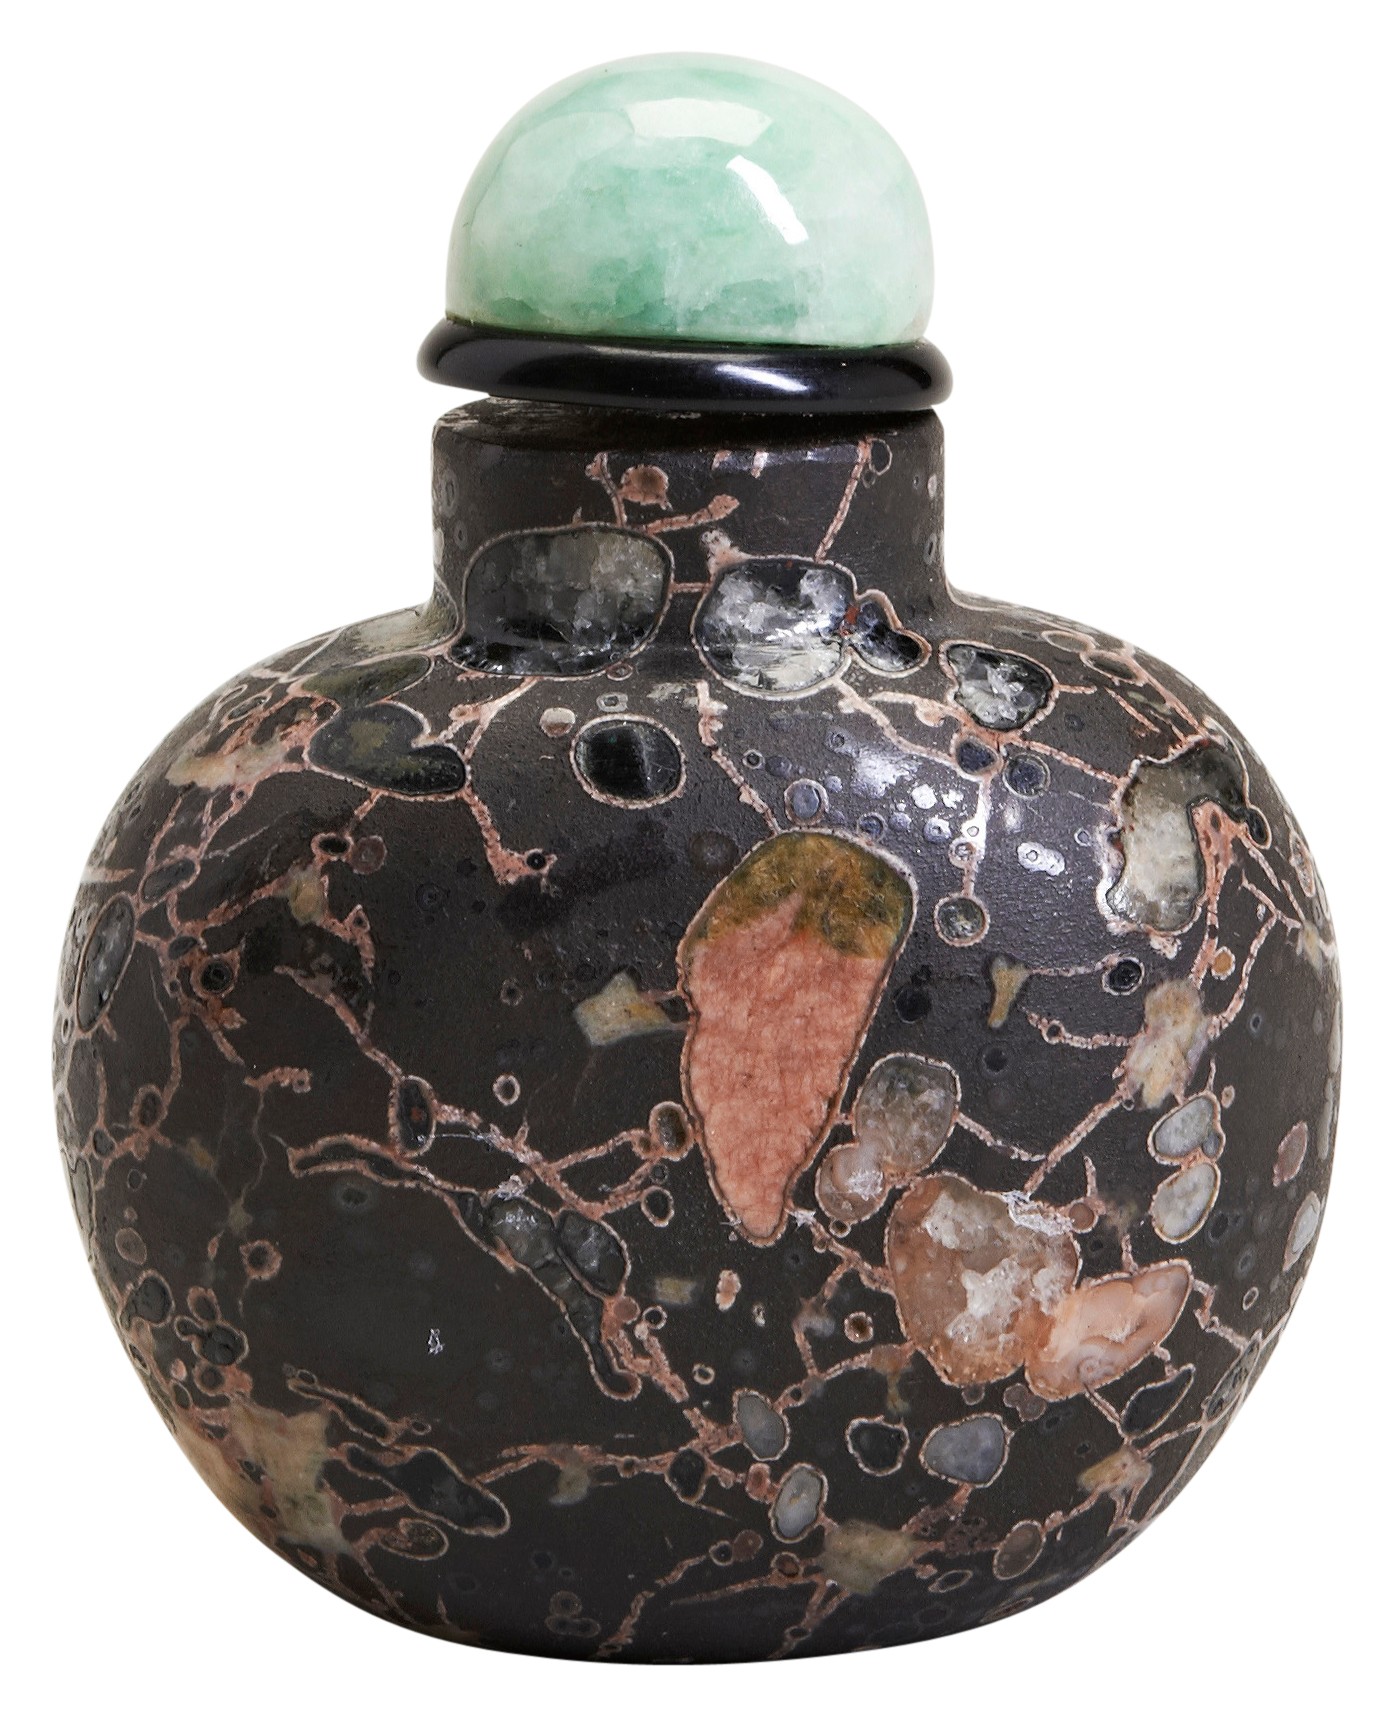 A HARDSTONE SNUFF BOTTLE WITH A JADE STOPPER 19TH/20TH CENTURY with natural stone grain and a jade